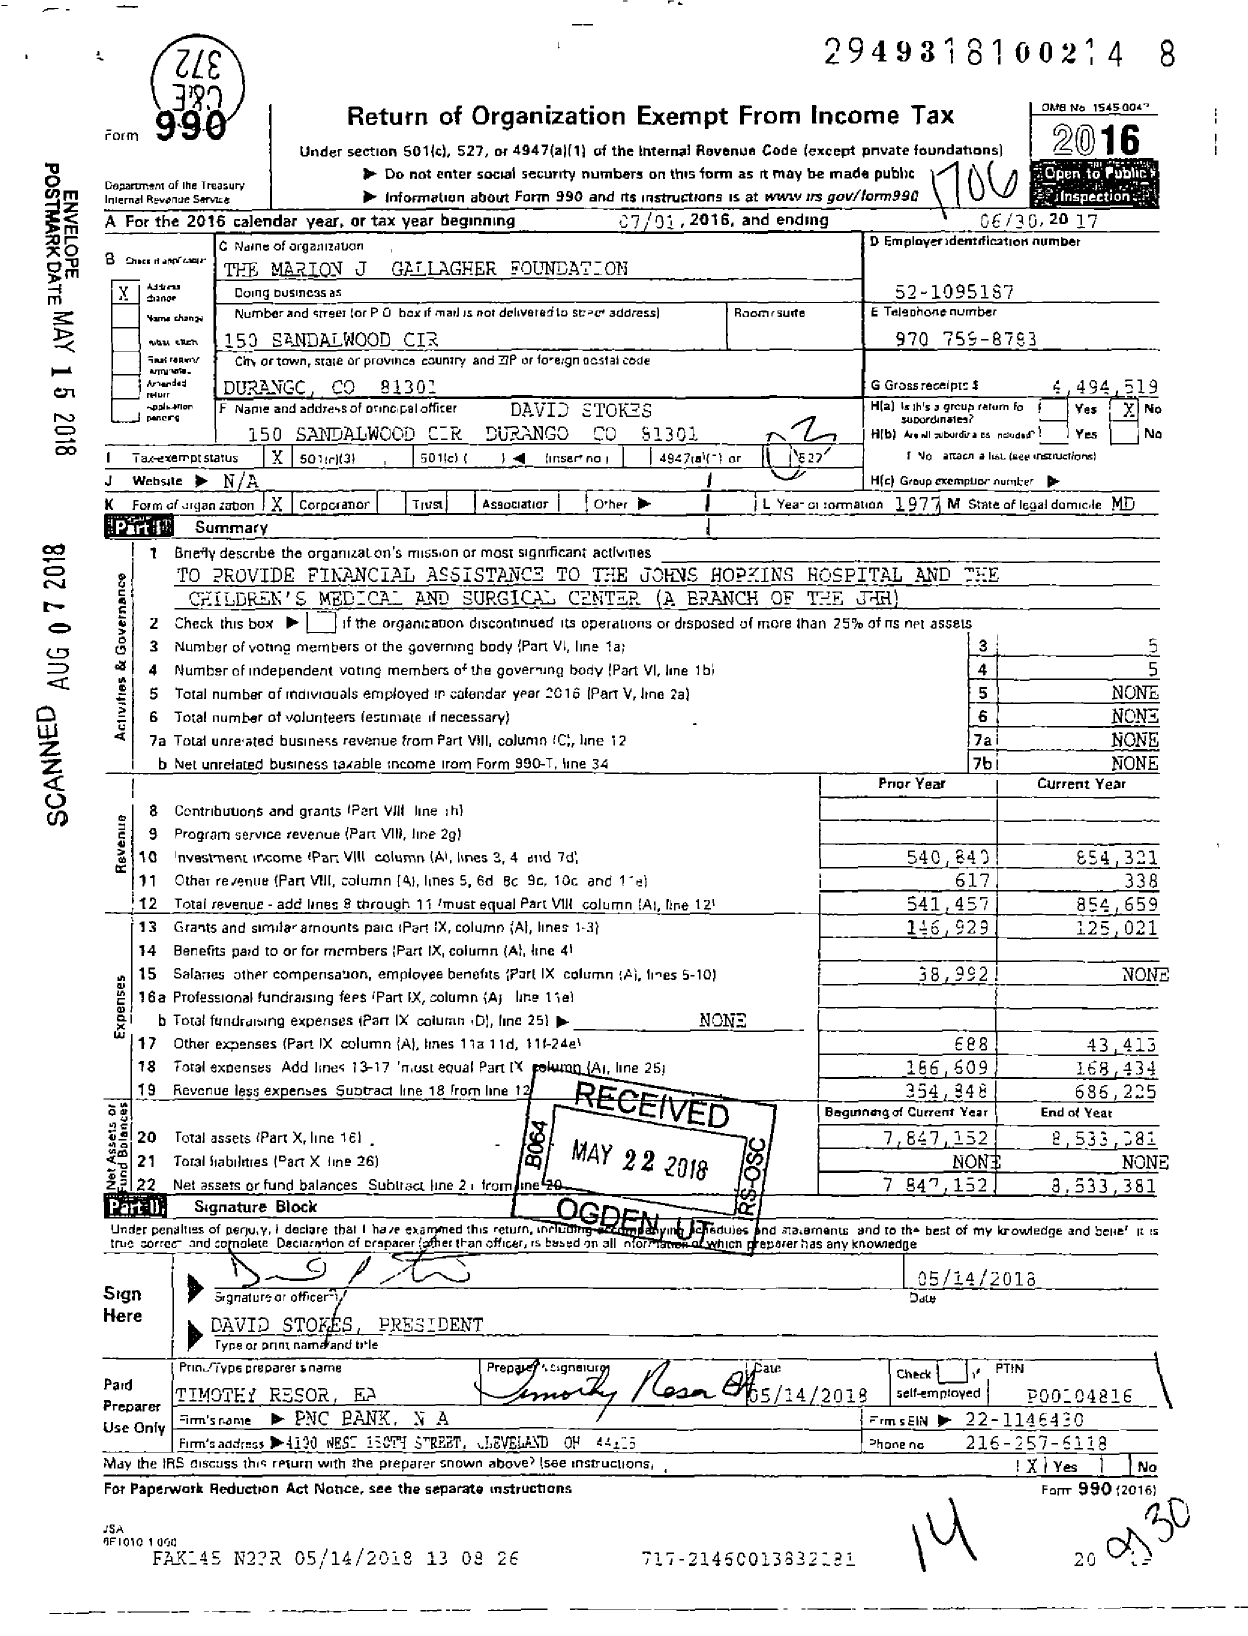 Image of first page of 2016 Form 990 for The Marion J Gallagher Foundation